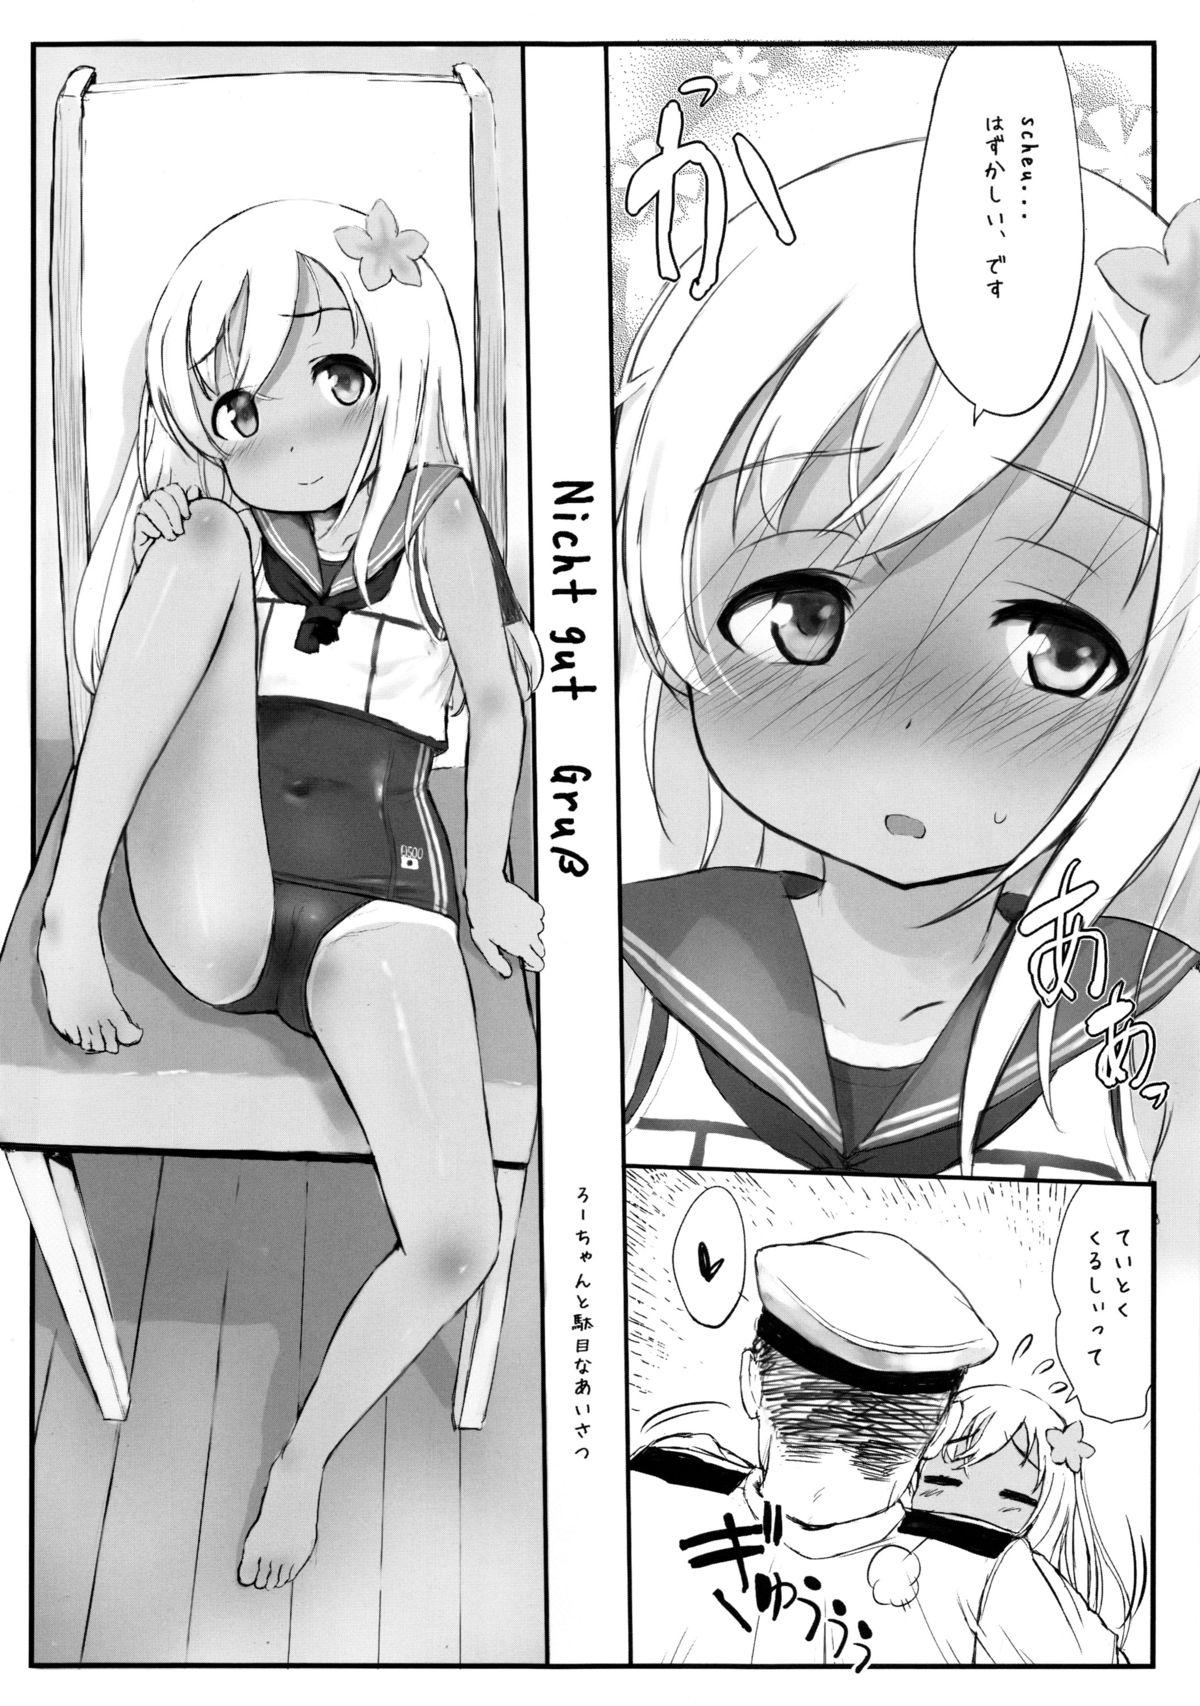 Longhair Nicht gut Gruse - Kantai collection Bigcock - Page 3